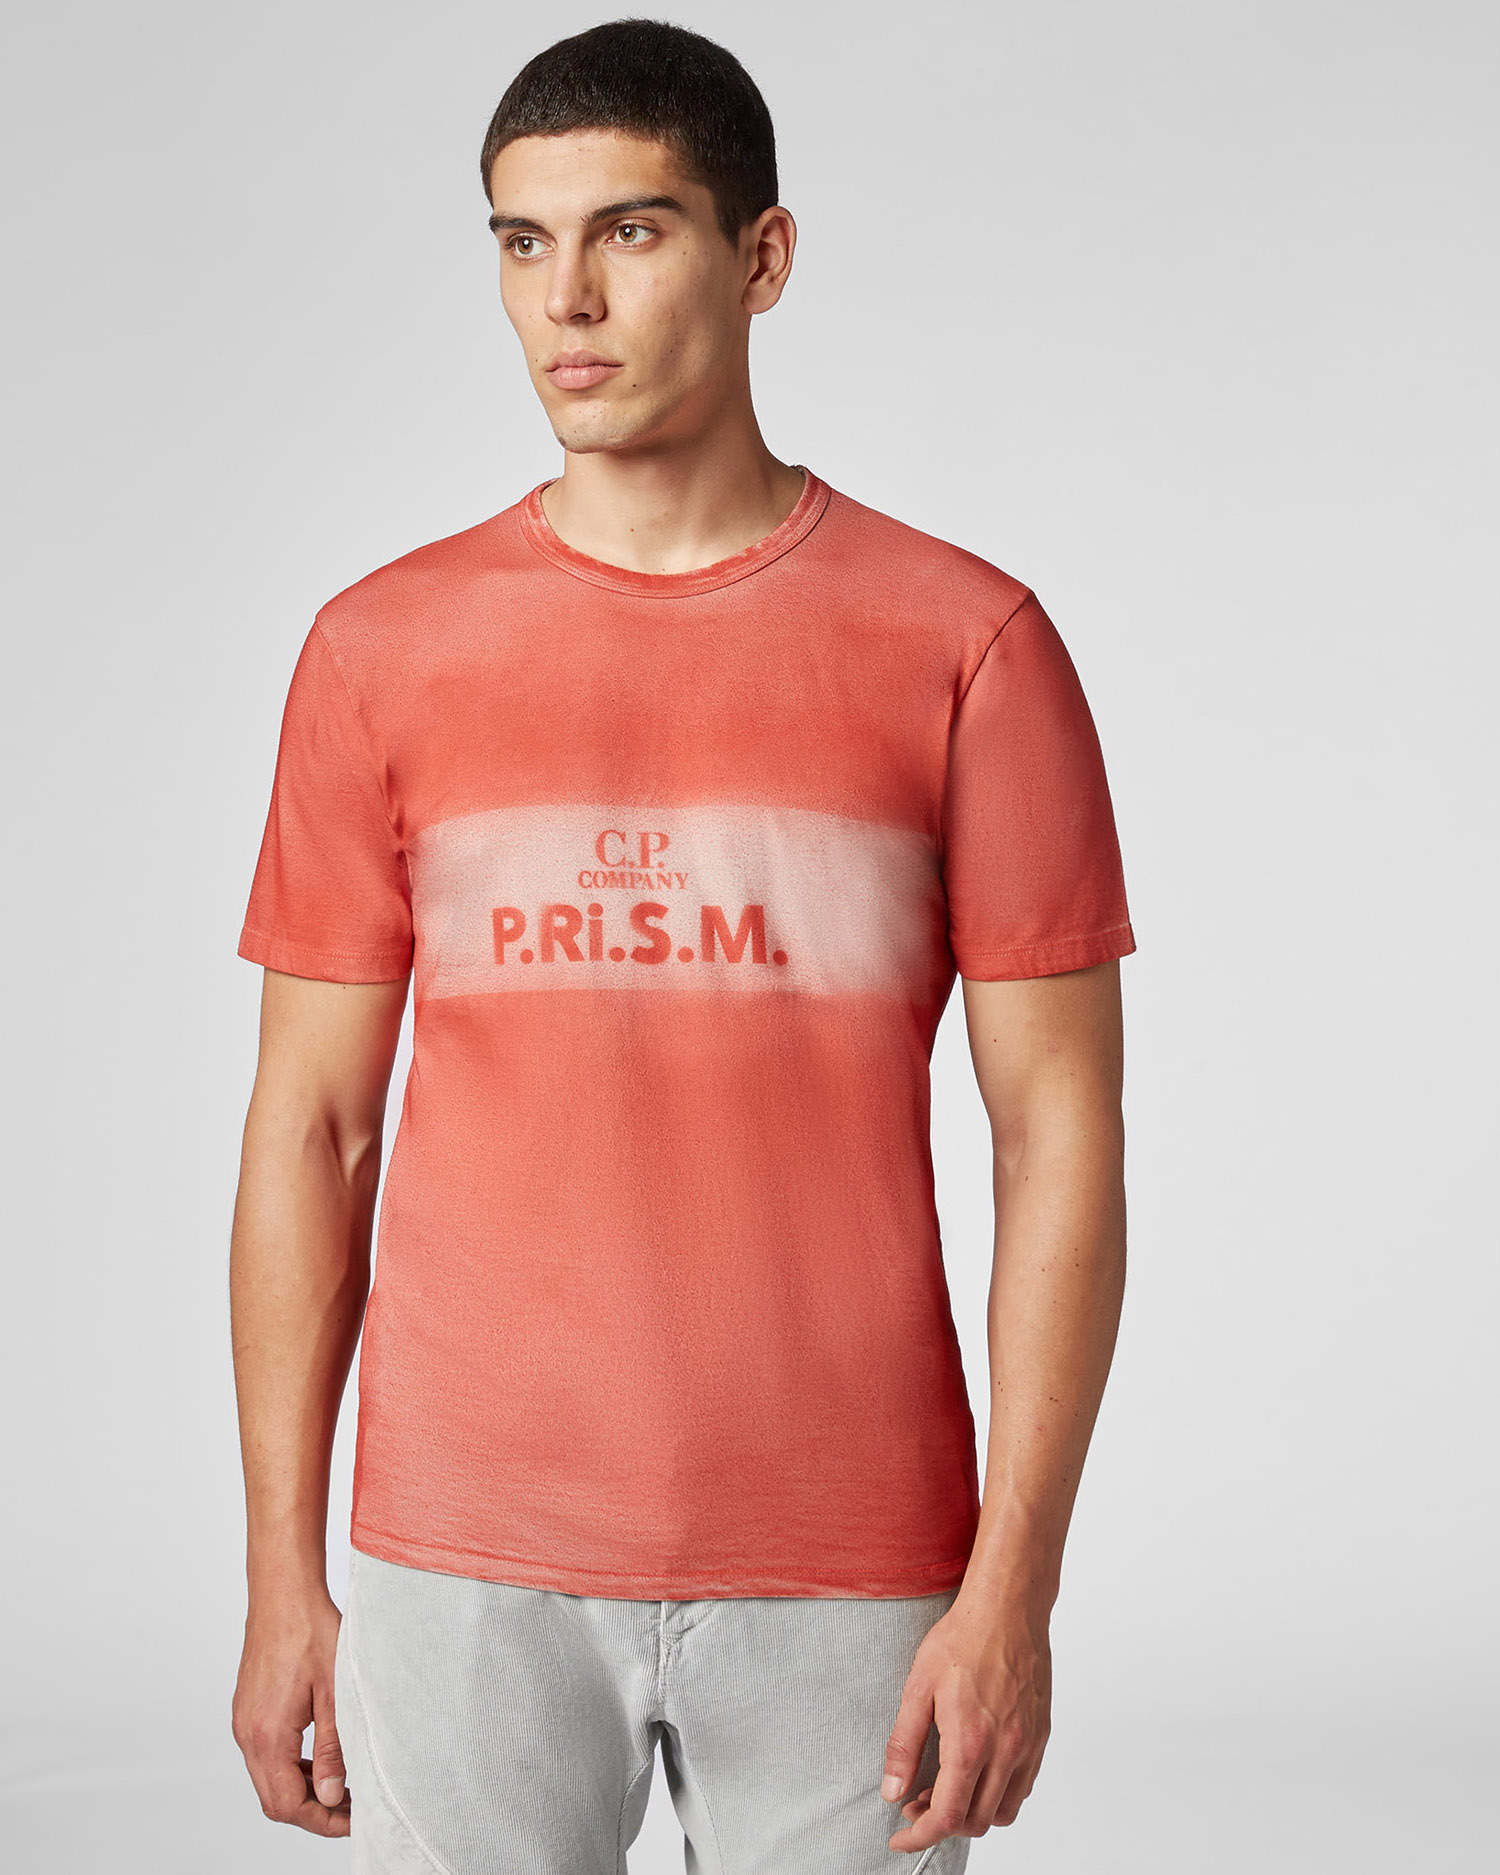 cp company red t shirt